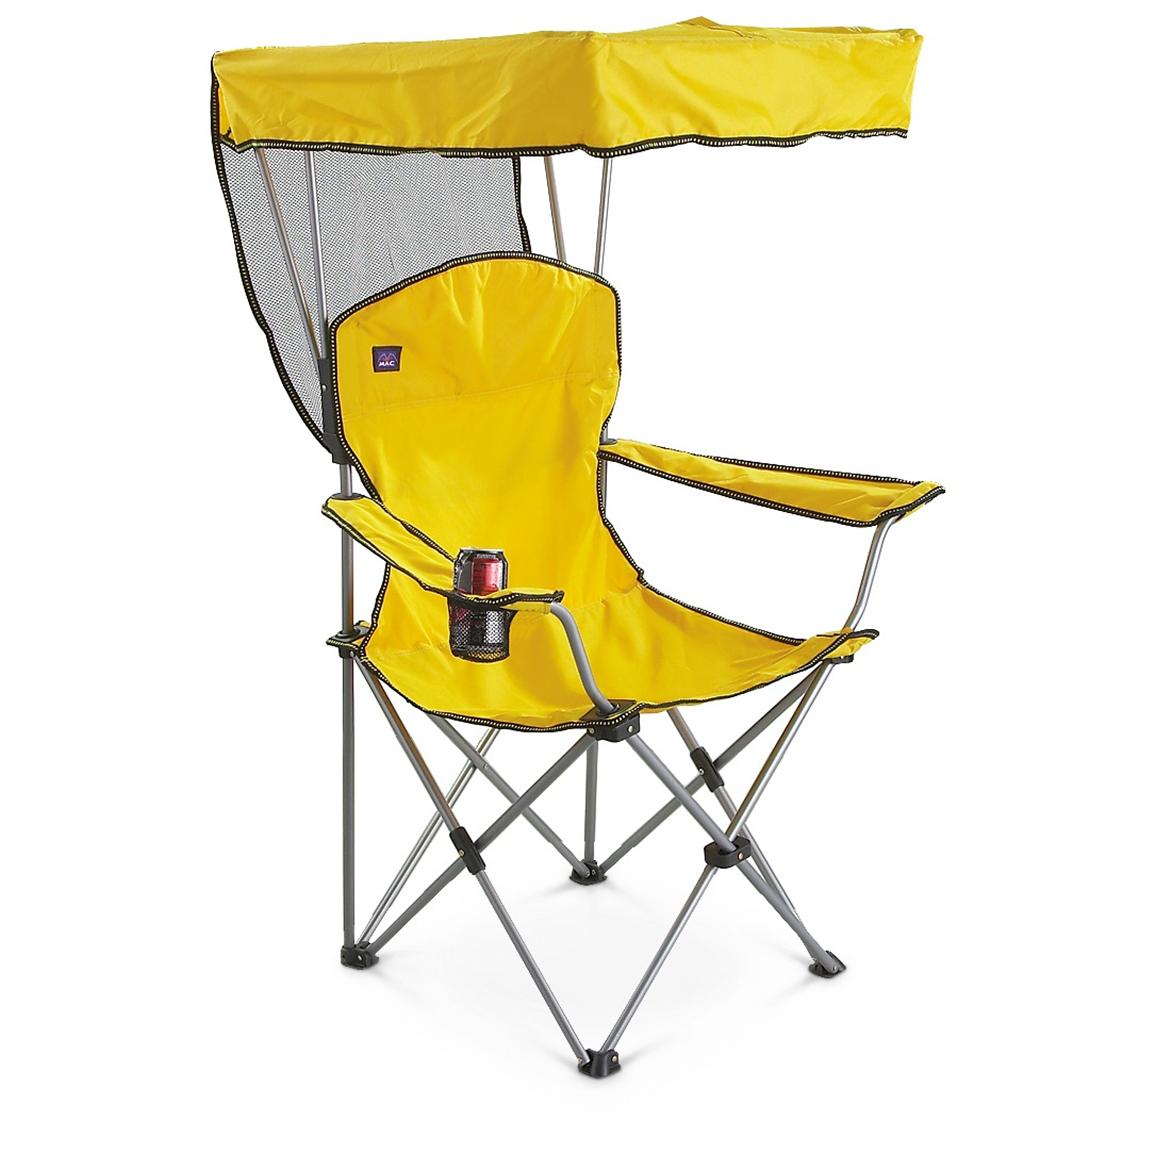 MAC Sports® Canopy Chair - 205419, Chairs at Sportsman's Guide